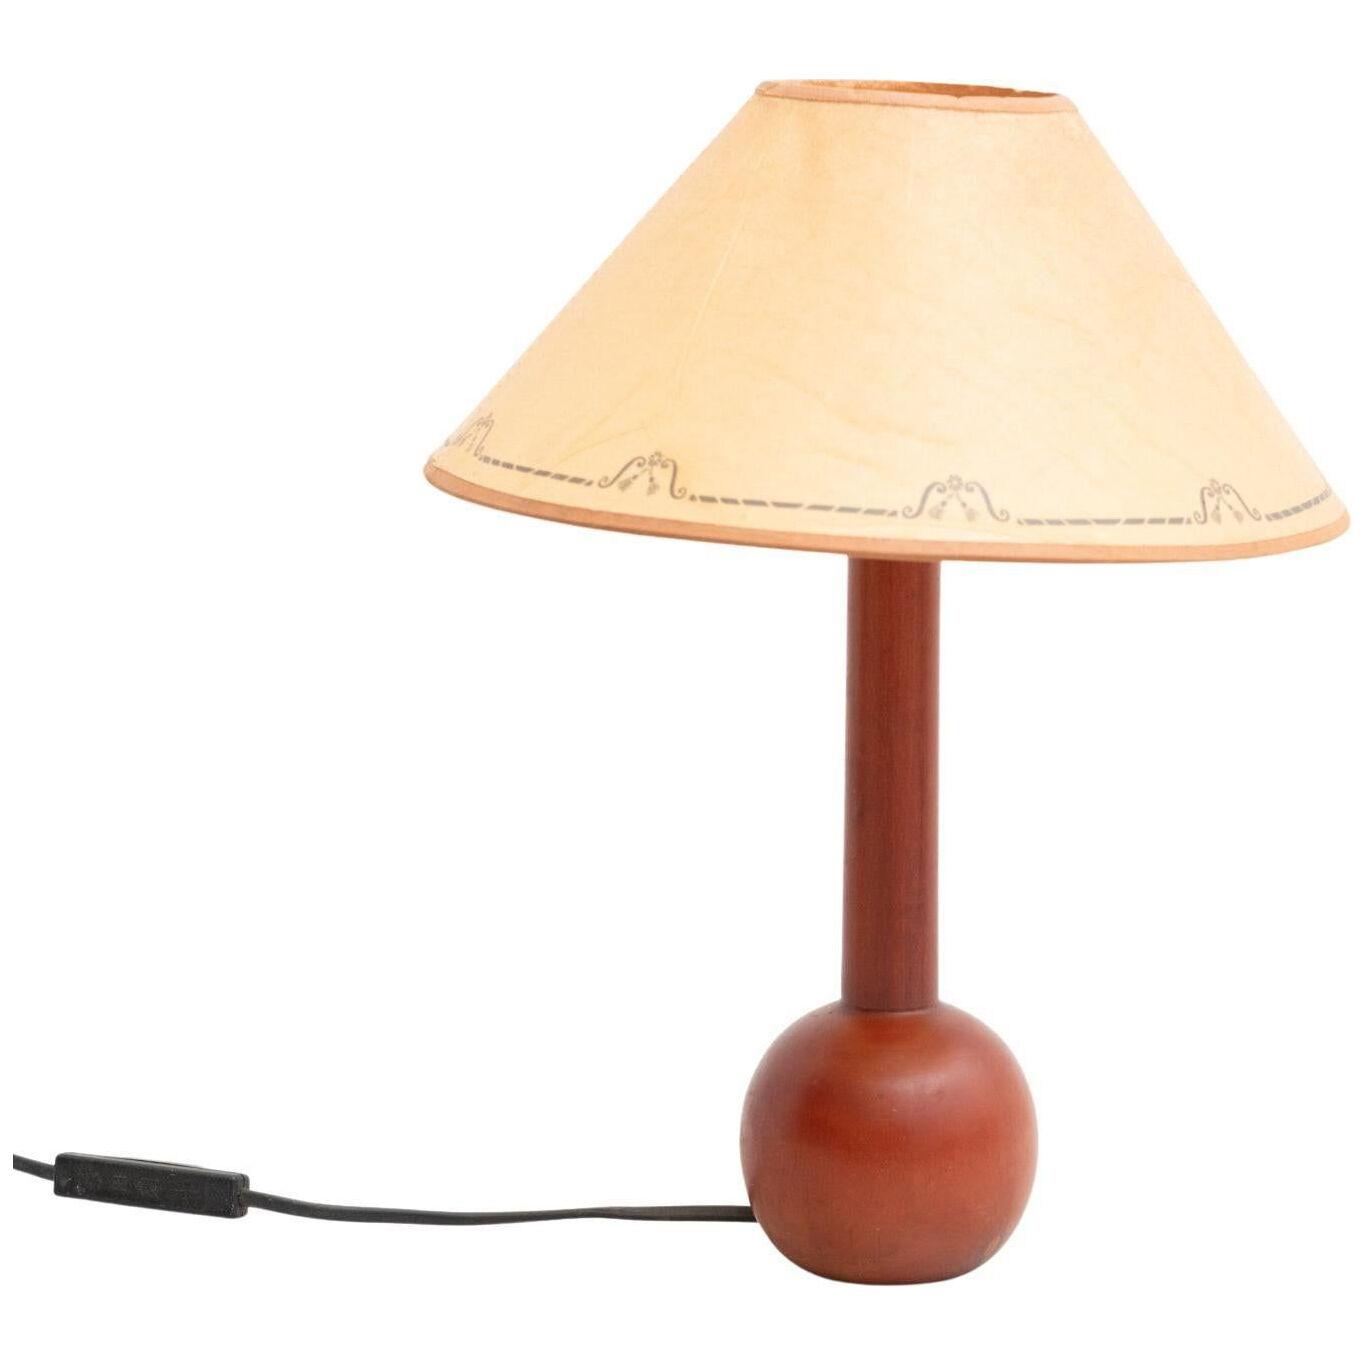 Early 20th Century Wood and Paper Table Lamp